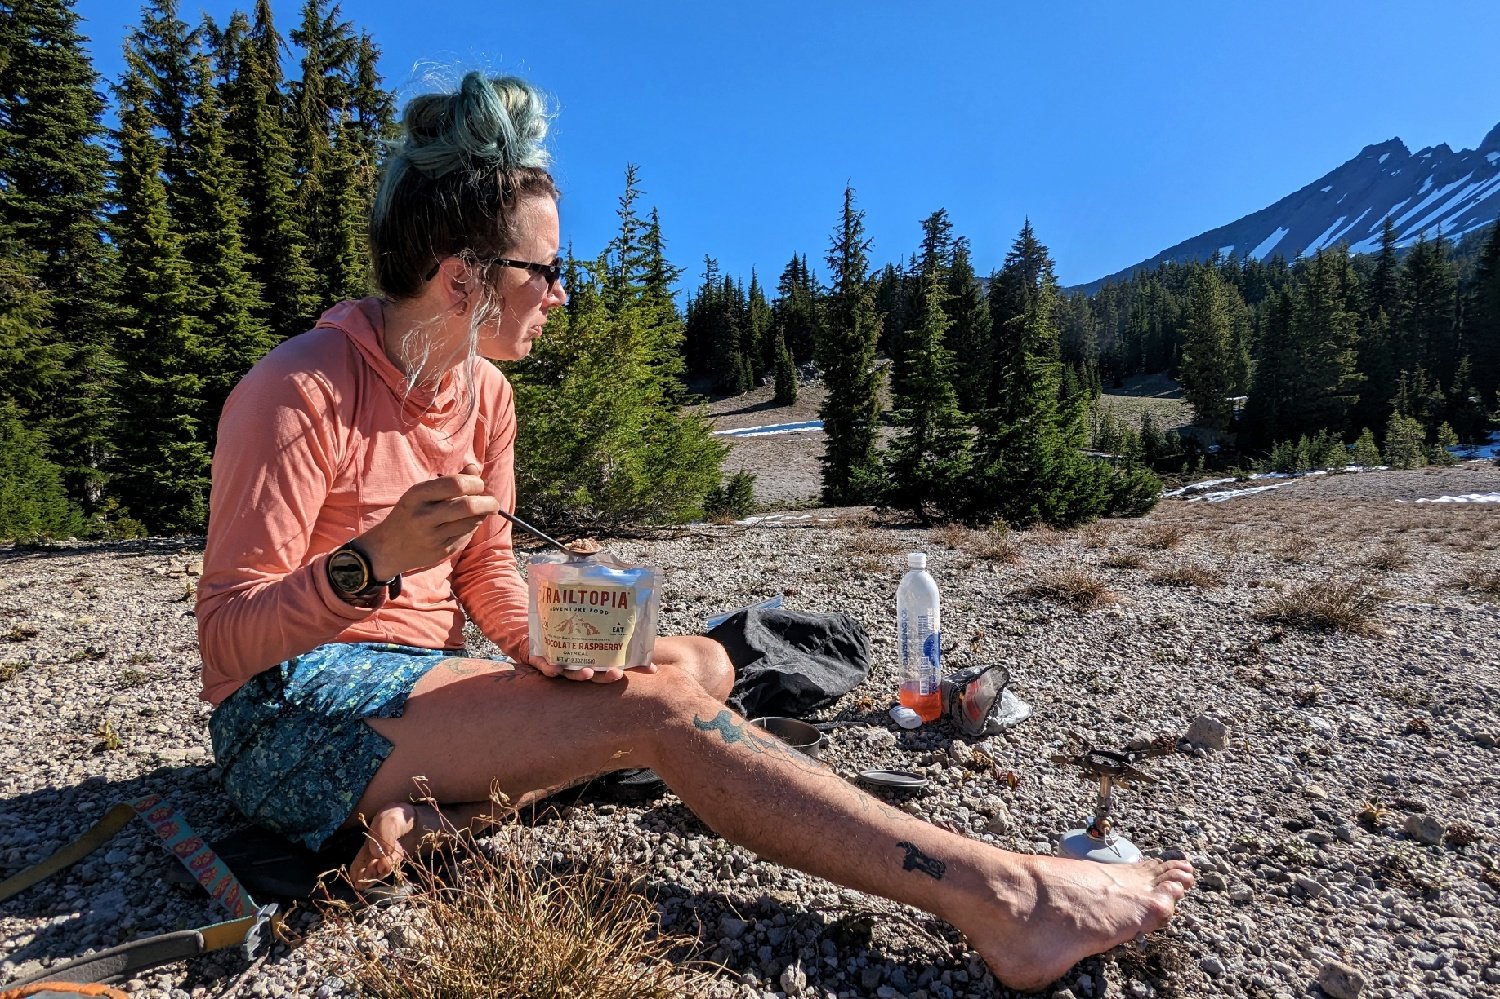 a hiker sitting in a rocky campsite eating food out of a freeze dried meal pouch - the hiker is looking off at a distant peak and the SOTO Windmaster stove is next to them